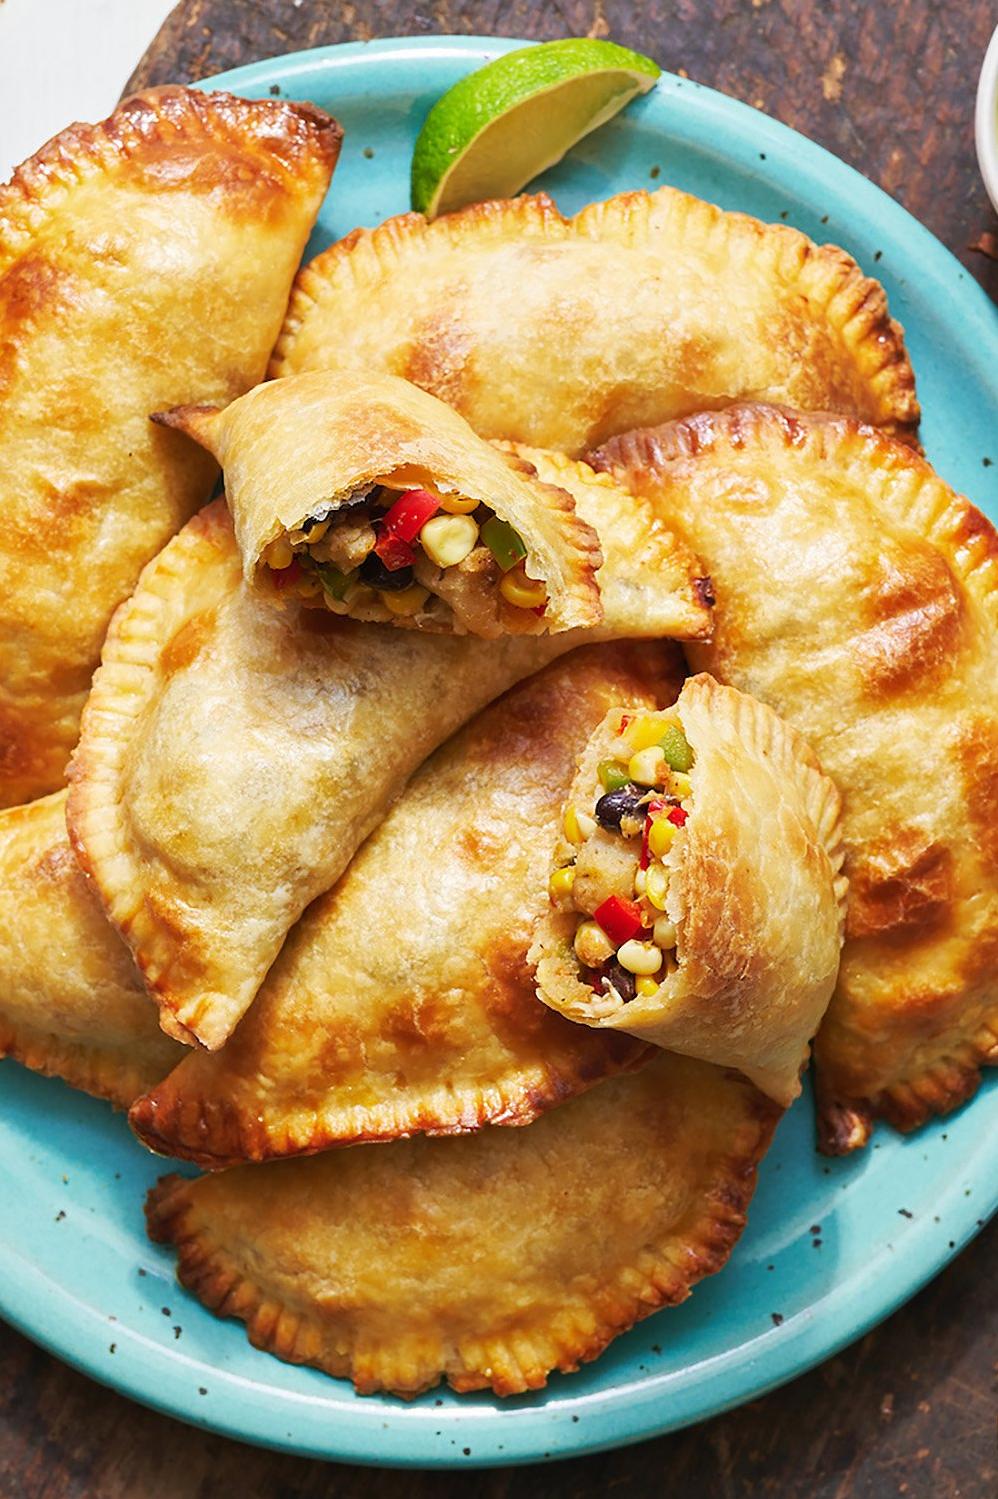  These vegetable empanadas pair perfectly with our tangy homemade tomato sauce.